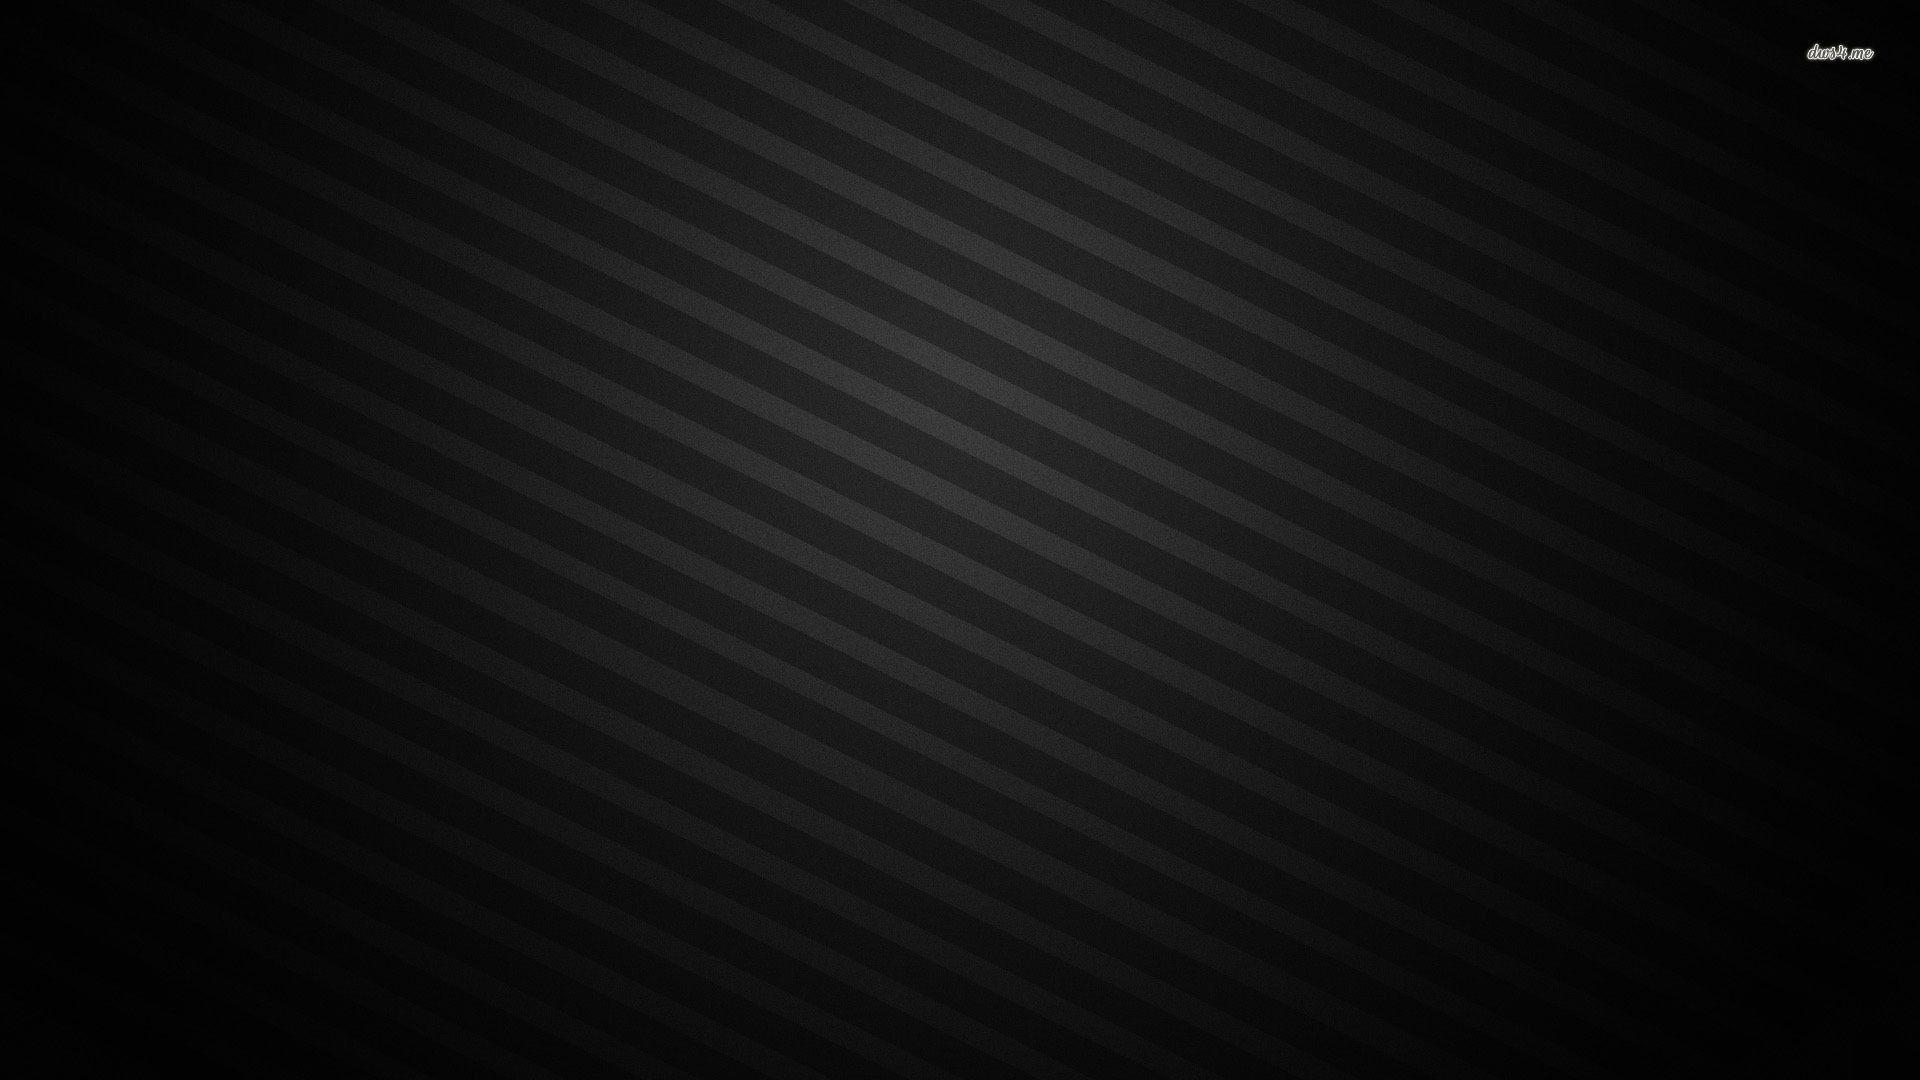 Black Striped Wallpapers - Wallpaper Cave